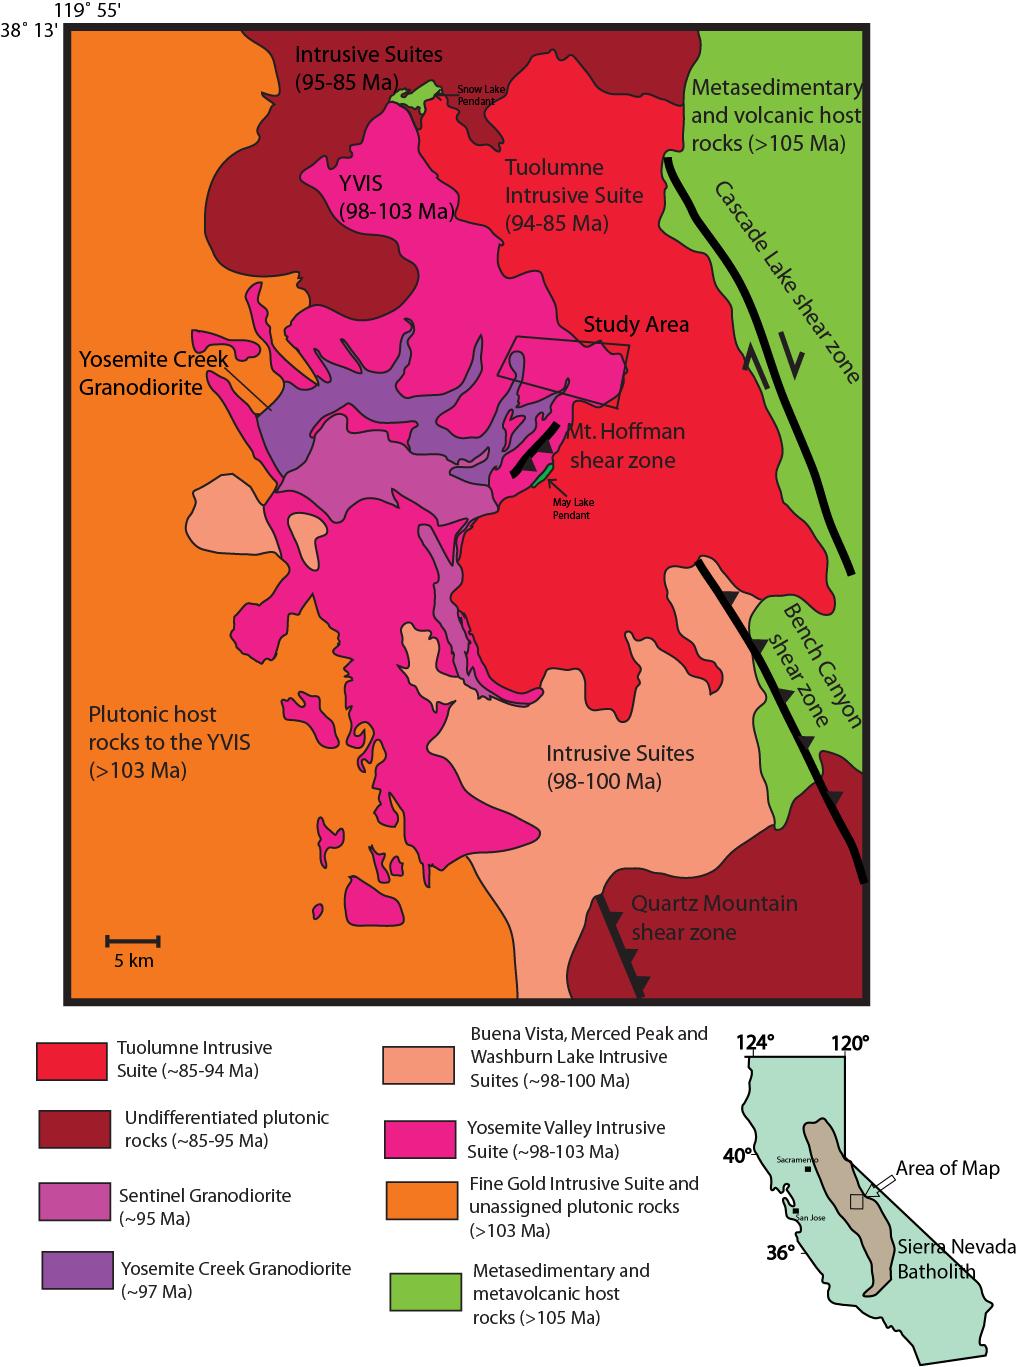 Figure 1. Map of the central Sierra Nevada batholith. Modified from Huber et al. (1989).